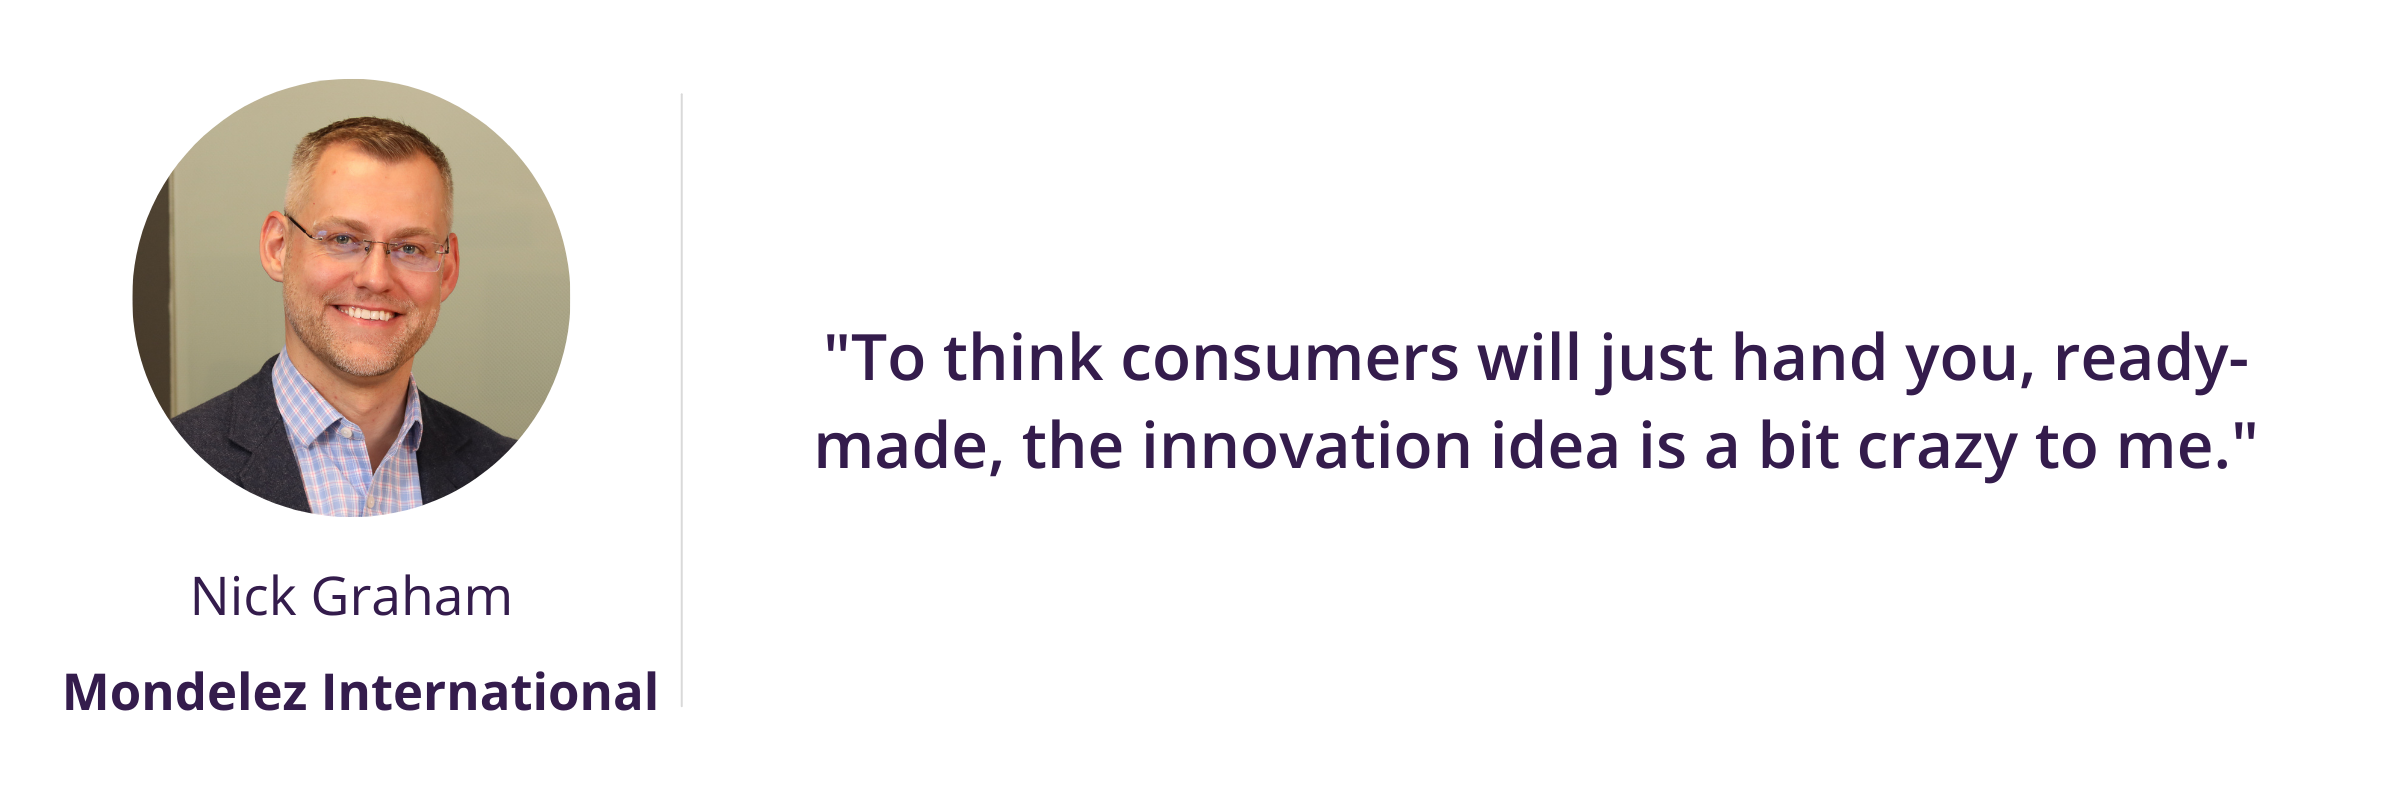 To think consumers will just hand you, ready-made, the innovation idea is a bit crazy to me.